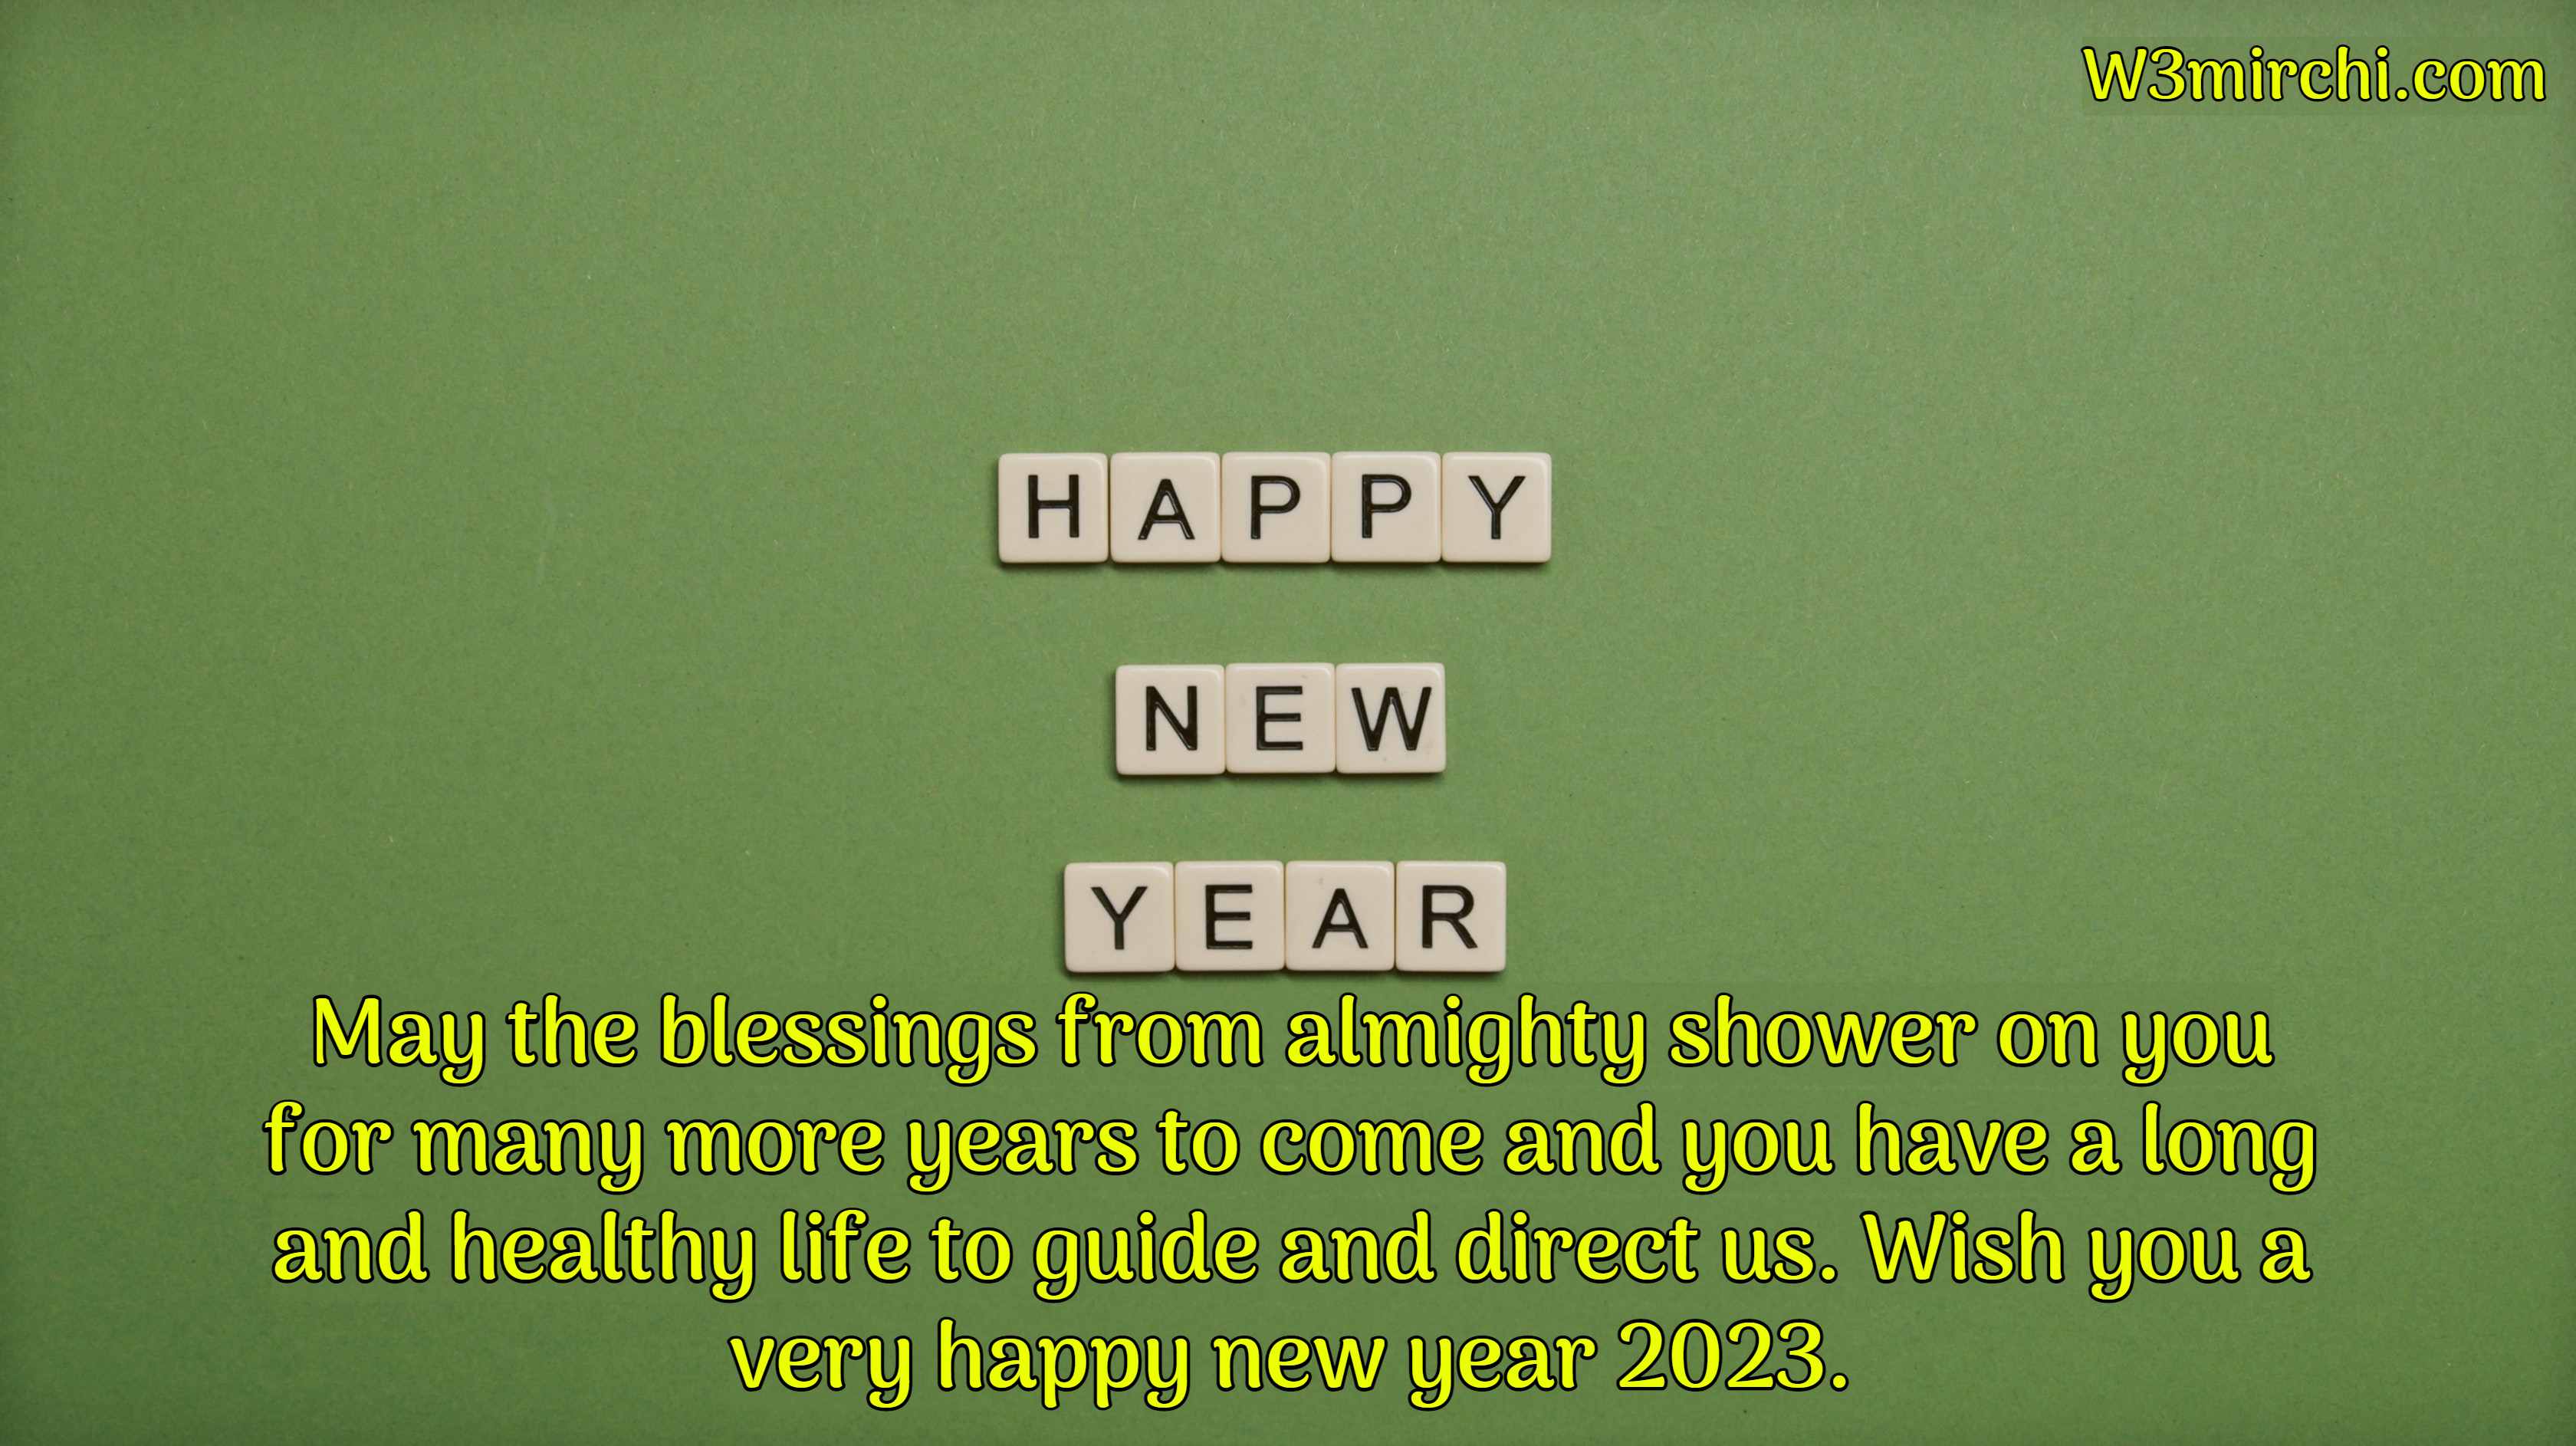 Wish you a very happy new year 2023.